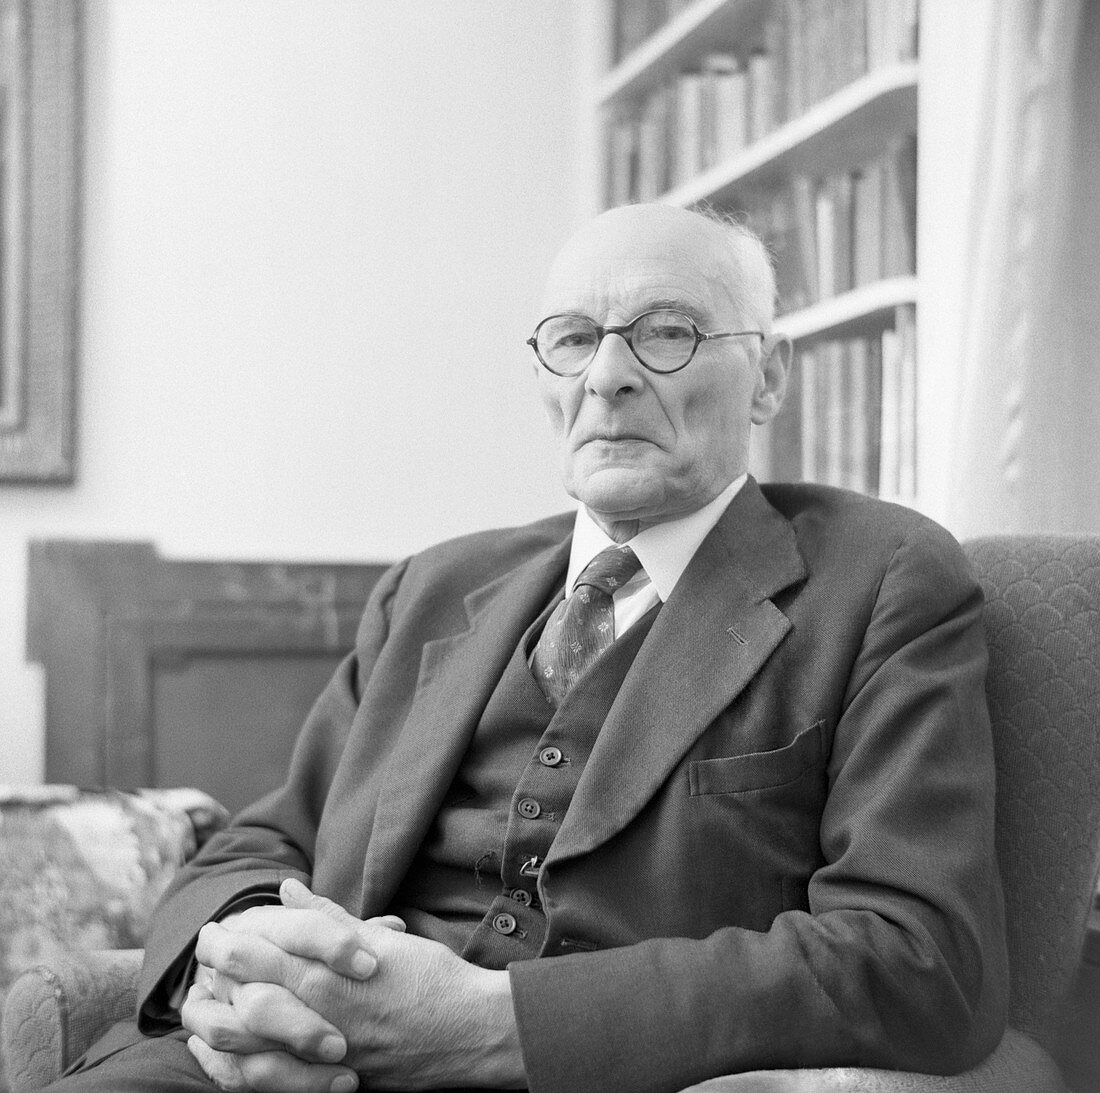 A. Carr-Saunders,British sociologist